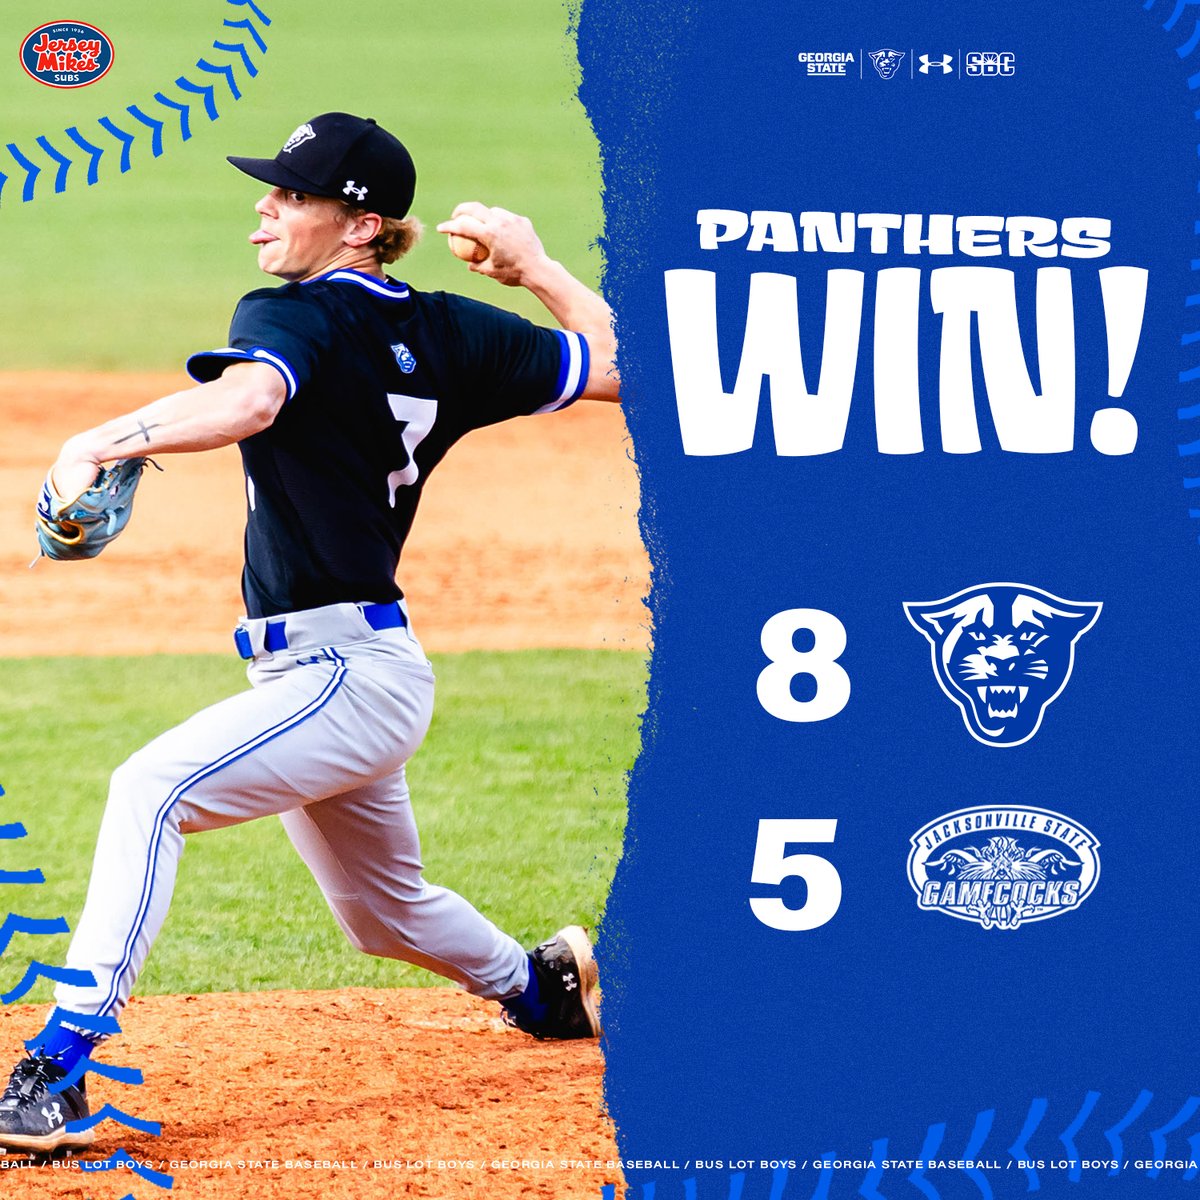 𝗥𝗢𝗔𝗗 𝗗𝗨𝗕 ‼️ Davis Chastain strikes out 7⃣ of the final 9 batters to seal the win! #LightItBlue | #BLB